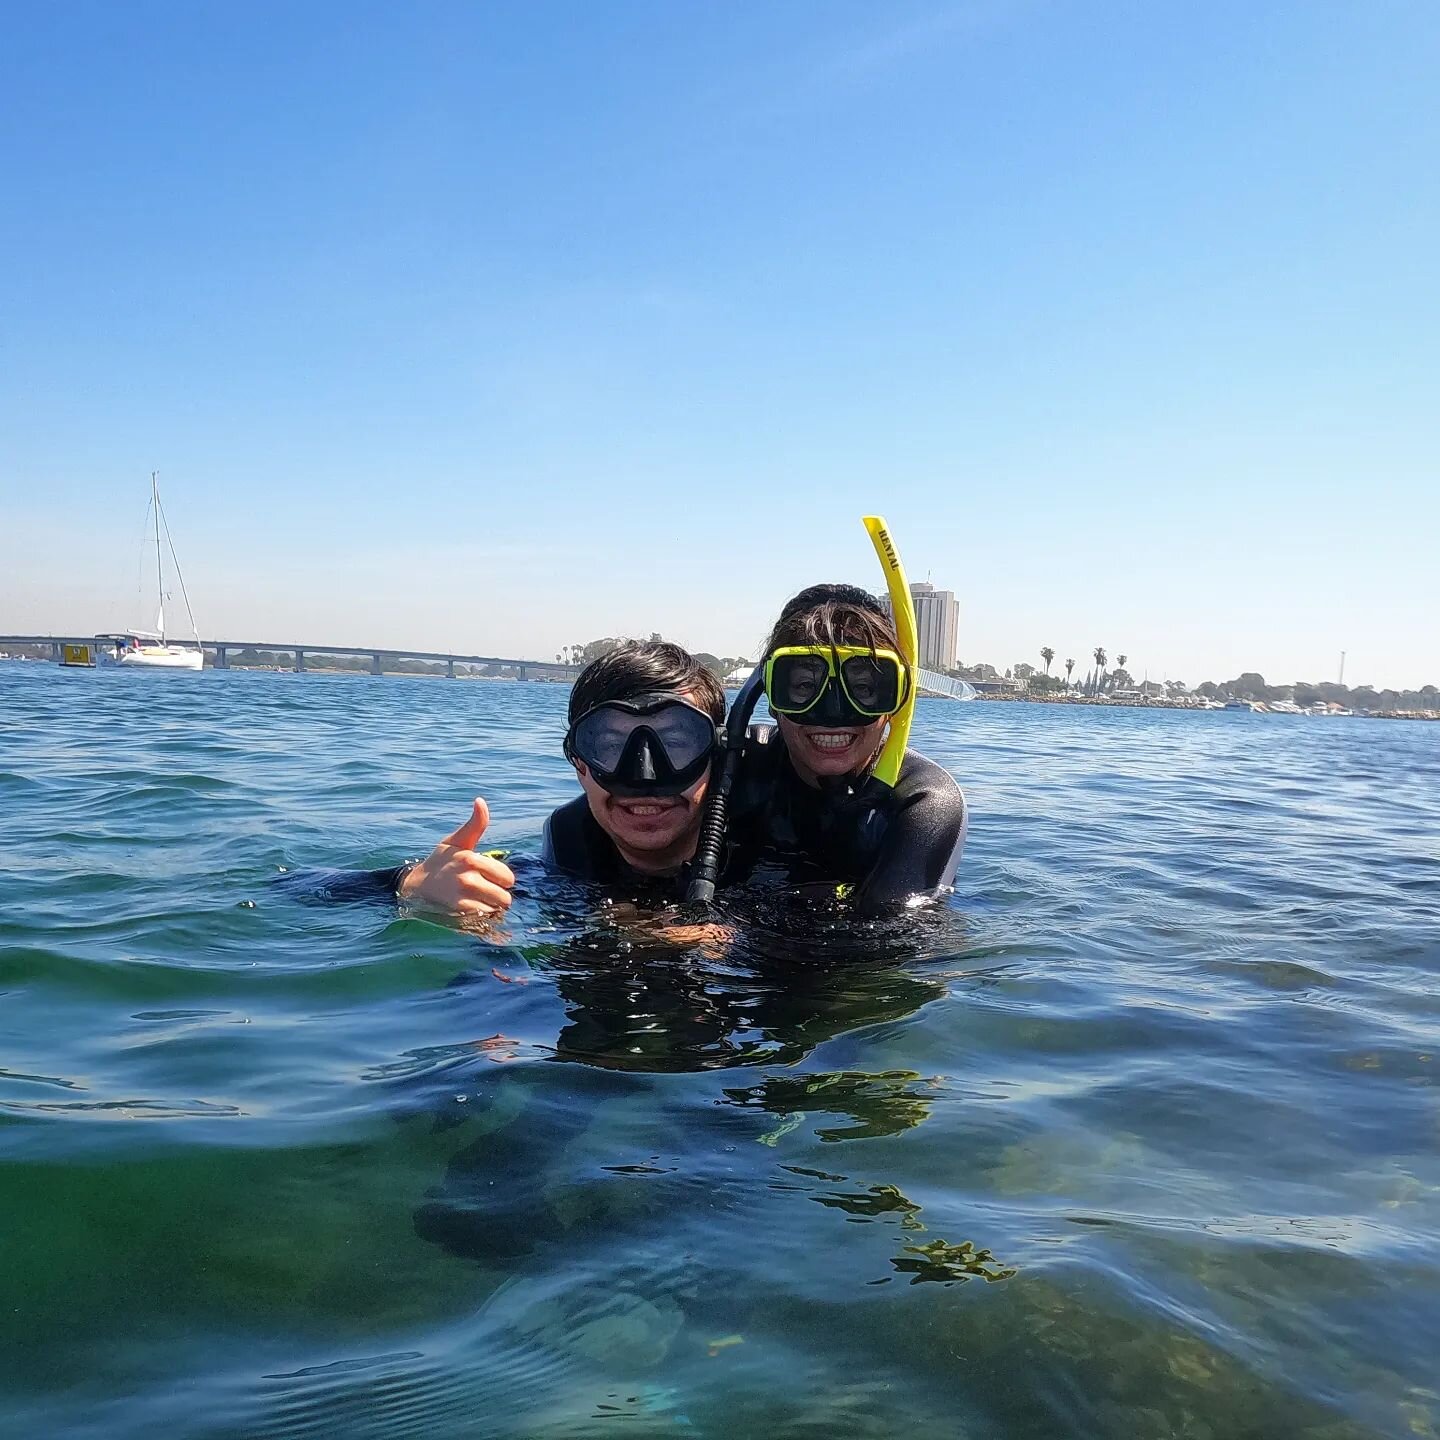 Snorkeling is a great birthday/date idea! We're seeing lots of life in the bay!
.
.
.
#snorkel #sandiego #california #marinebiology #adventure #datenight #couples #fun #birthday #travel #nature #water